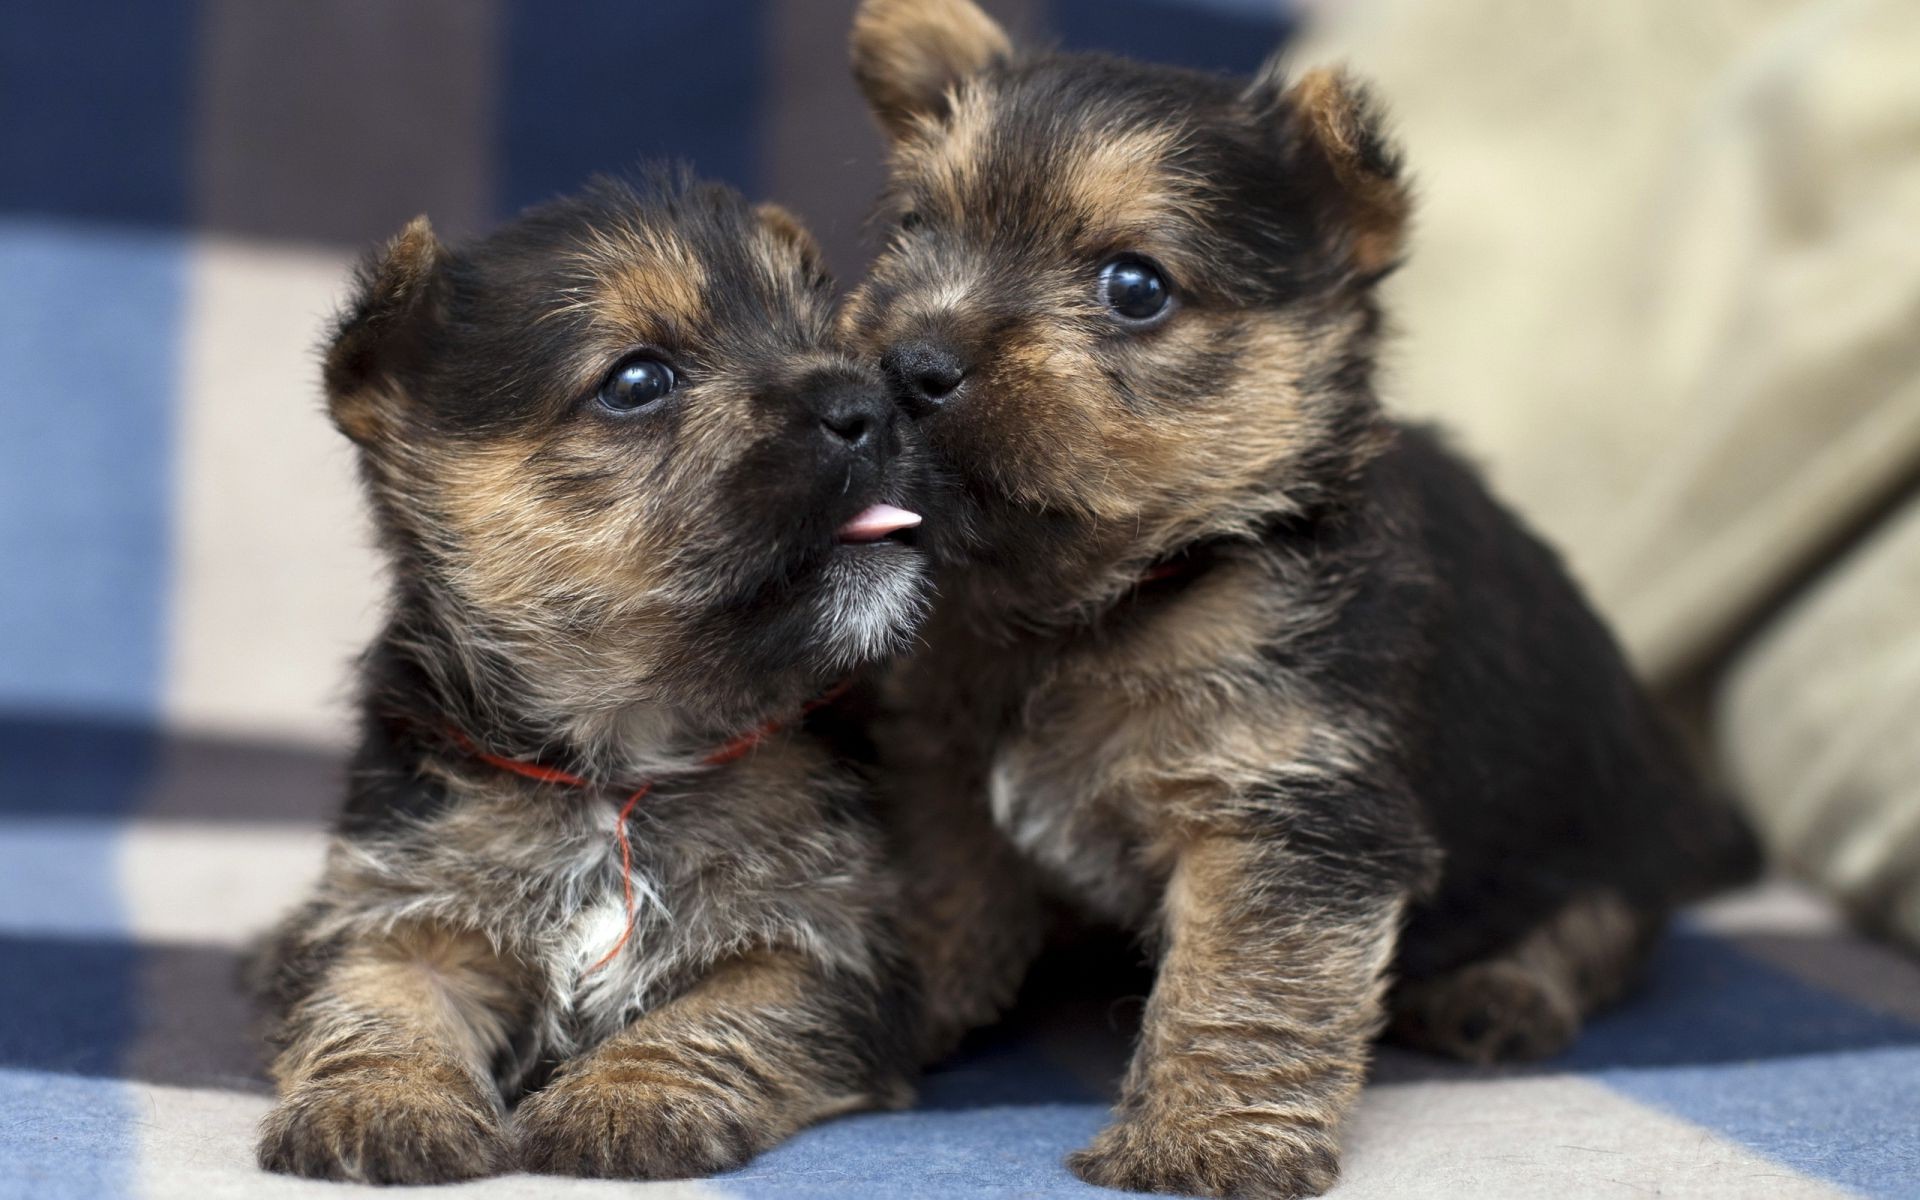 dogs dog canine pet puppy mammal cute portrait animal terrier little purebred fur domestic breed pedigree sit adorable looking